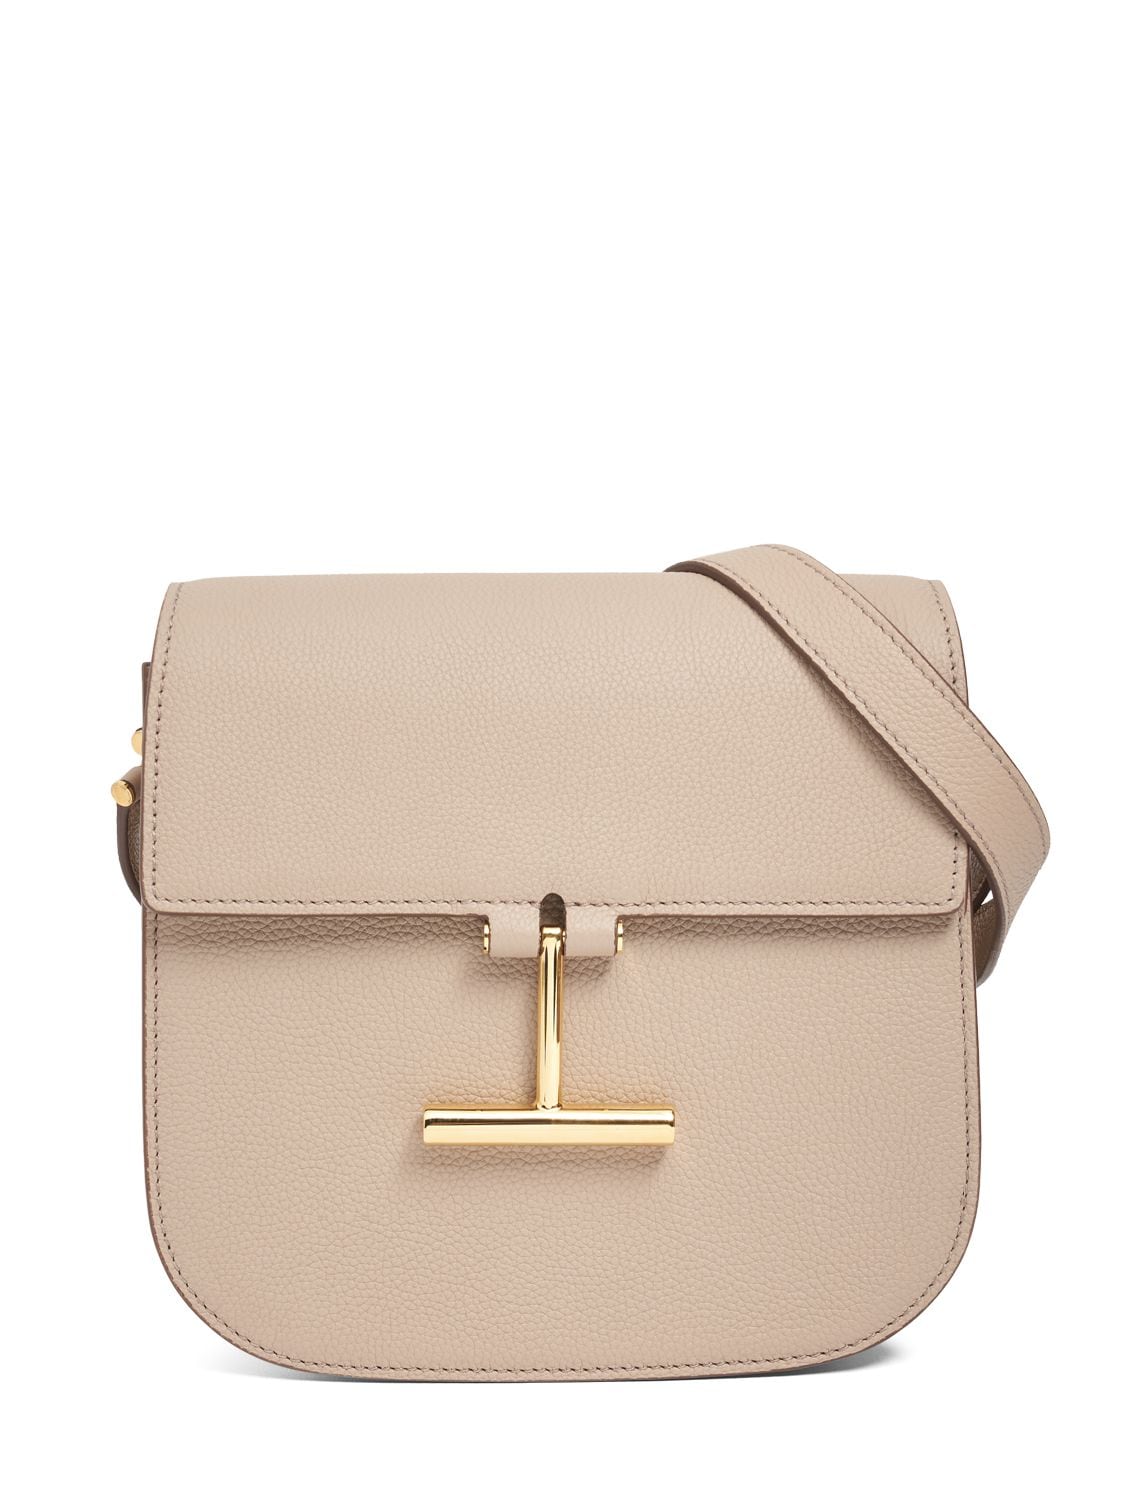 Tom Ford Mini Leather Crossbody Bag In Silk Taupe